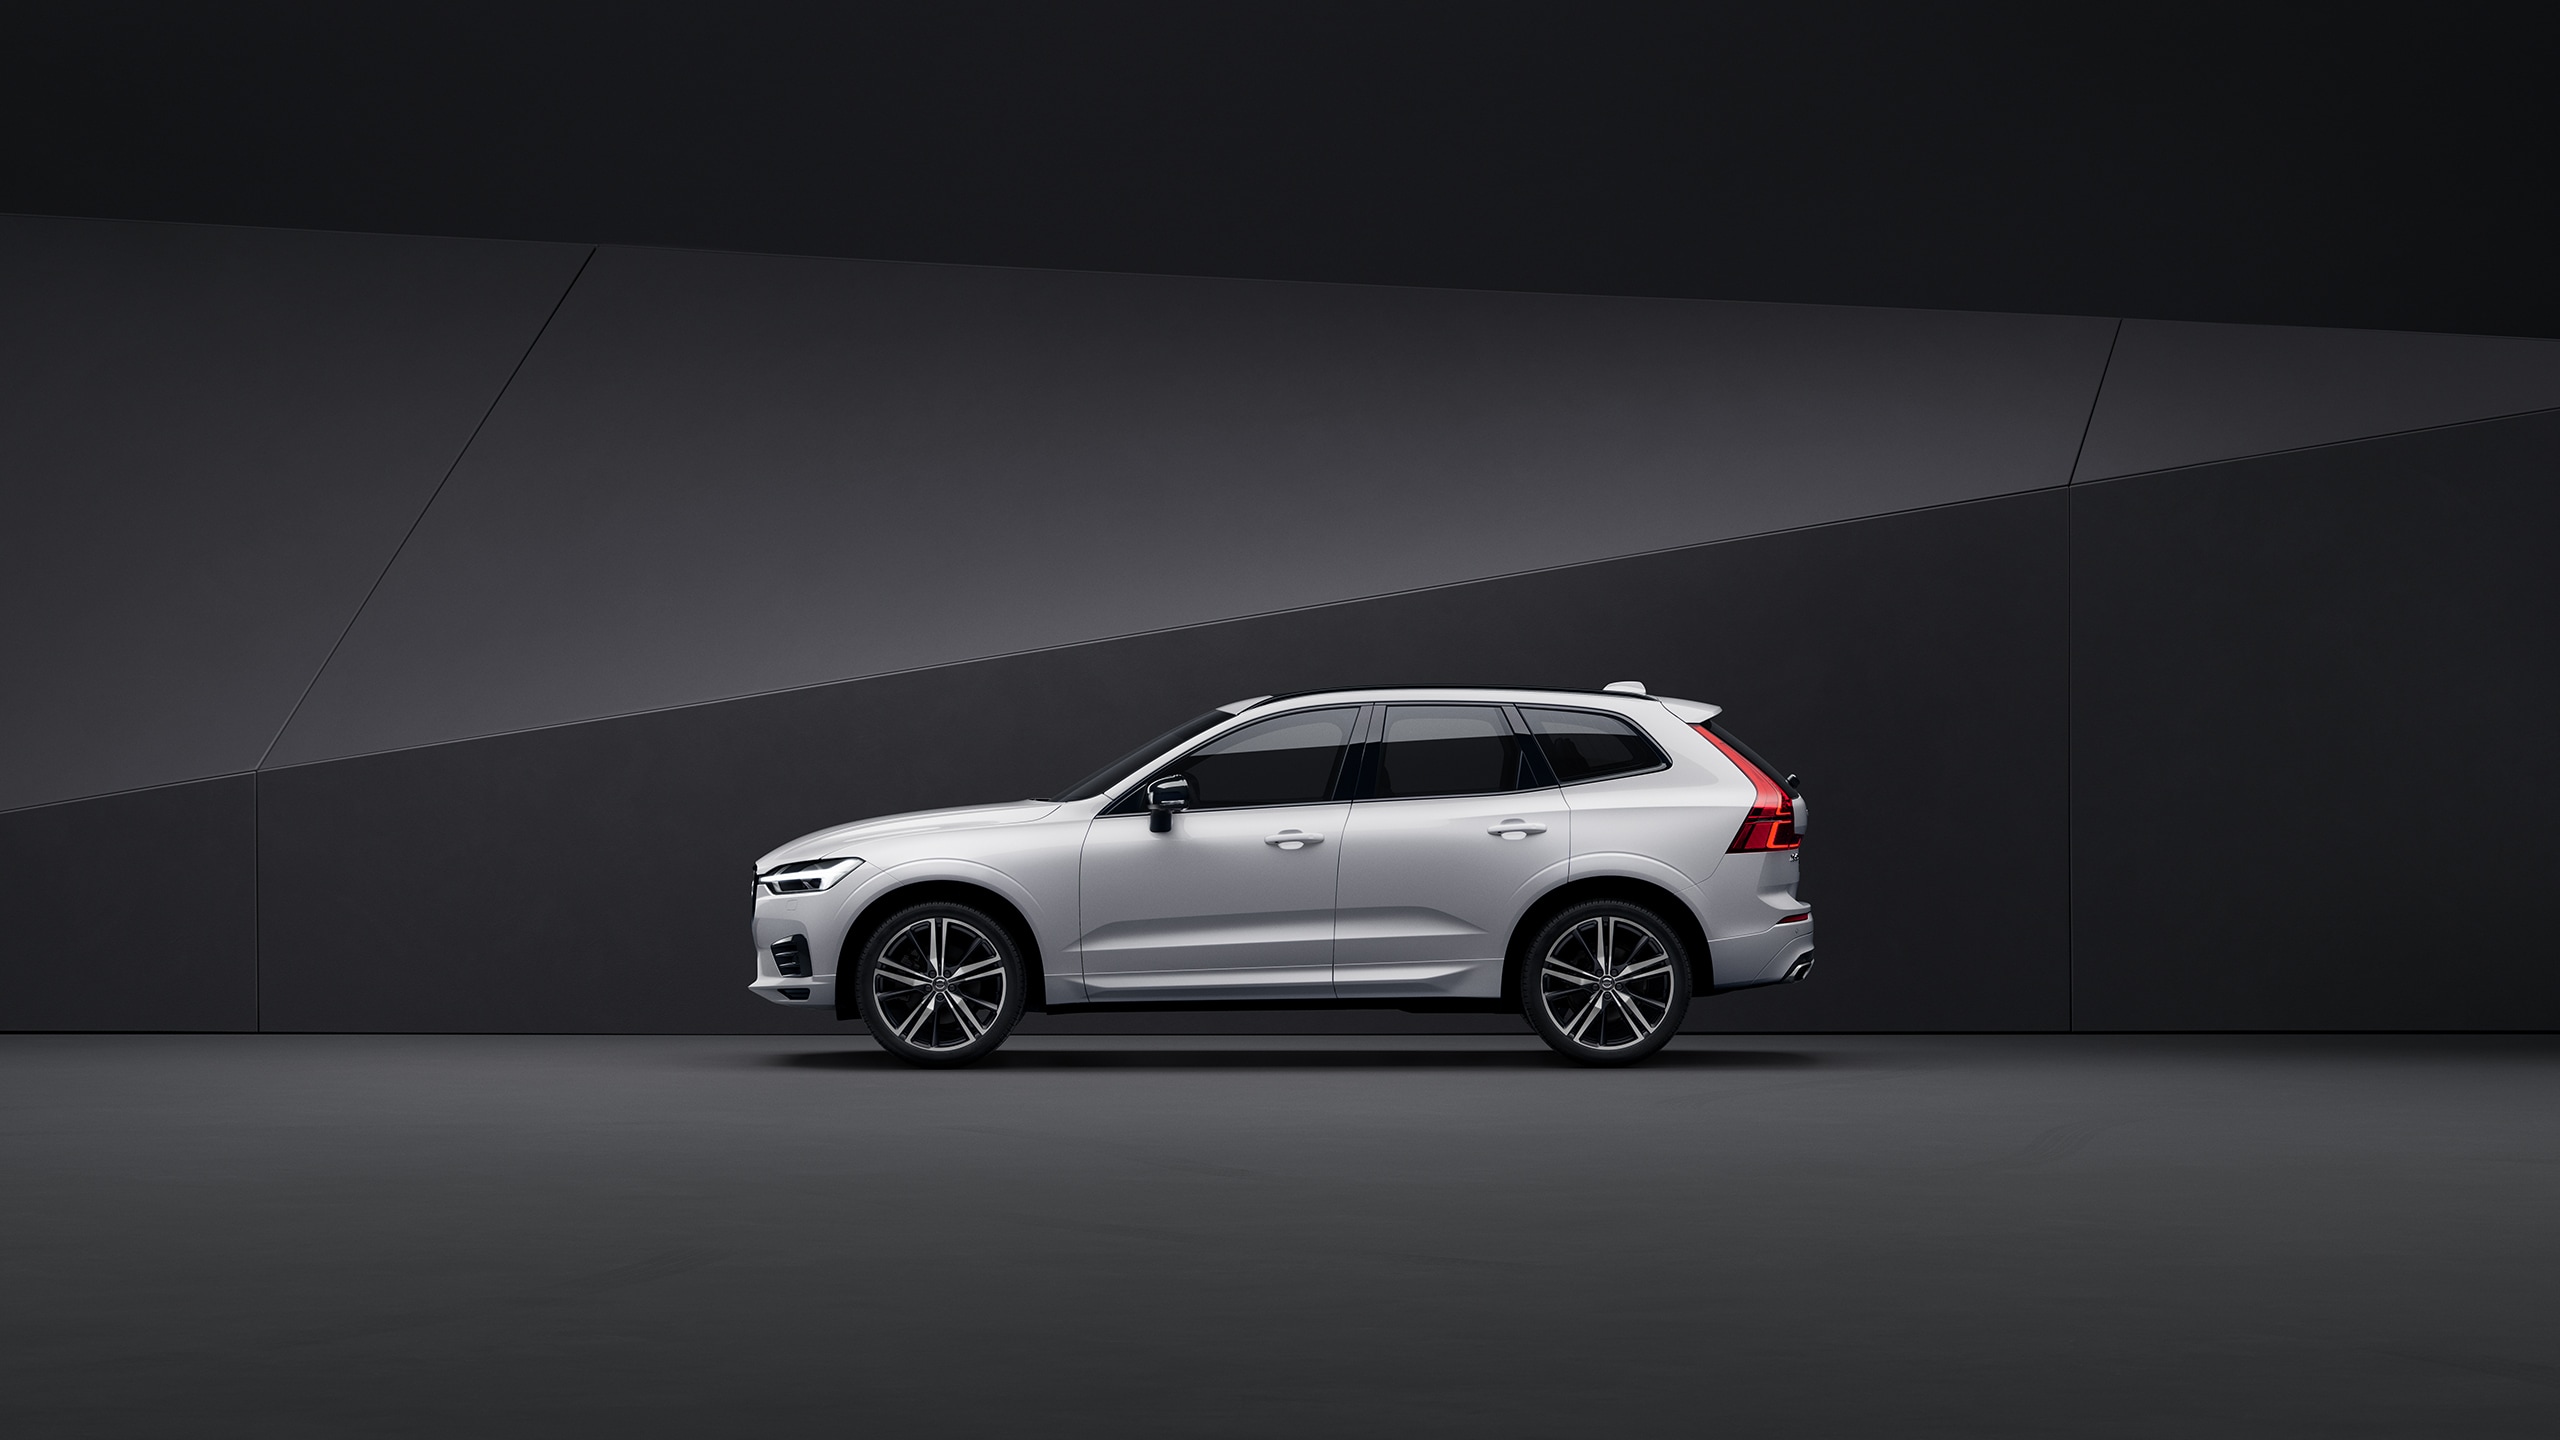 Side view of a silver Volvo XC60 parked in a black indoor environment.